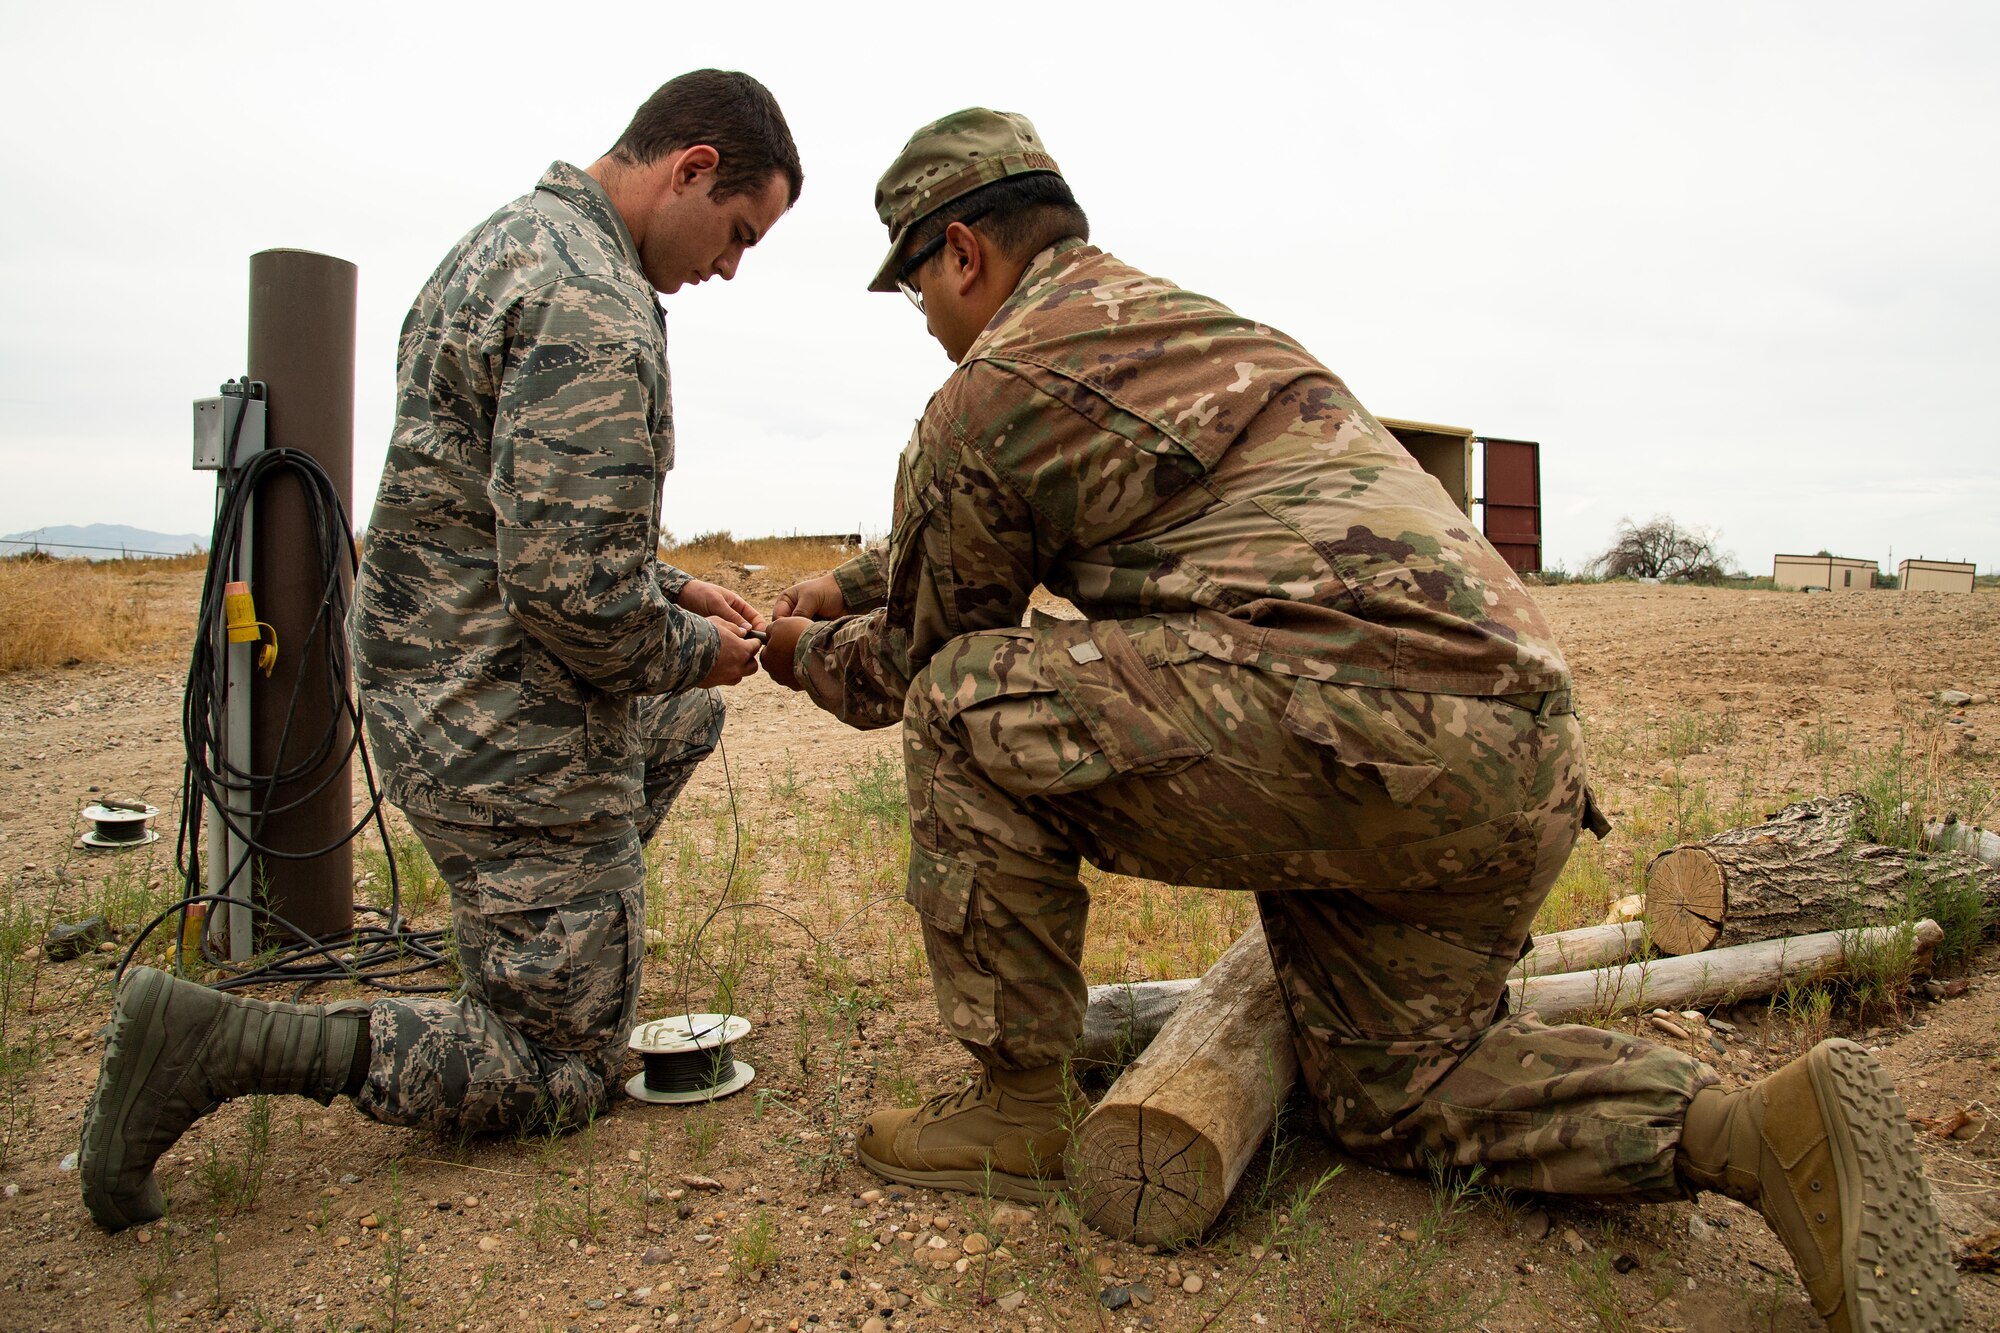 Air Force ROTC cadet Luke Carey, left, assisted by Staff Sgt. Guadalupe Corona, 775th Explosive Ordnance Disposal Flight, prepares to detonate an explosive charge at Hill Air Force Base, Utah, July 31, 2019. Over 80 cadets visited Hill as part of a professional development training program called Operation Air Force. The program gives cadets a greater understanding of the Air Force while introducing them to a variety of careers fields. (U.S. Air Force photo by R. Nial Bradshaw)